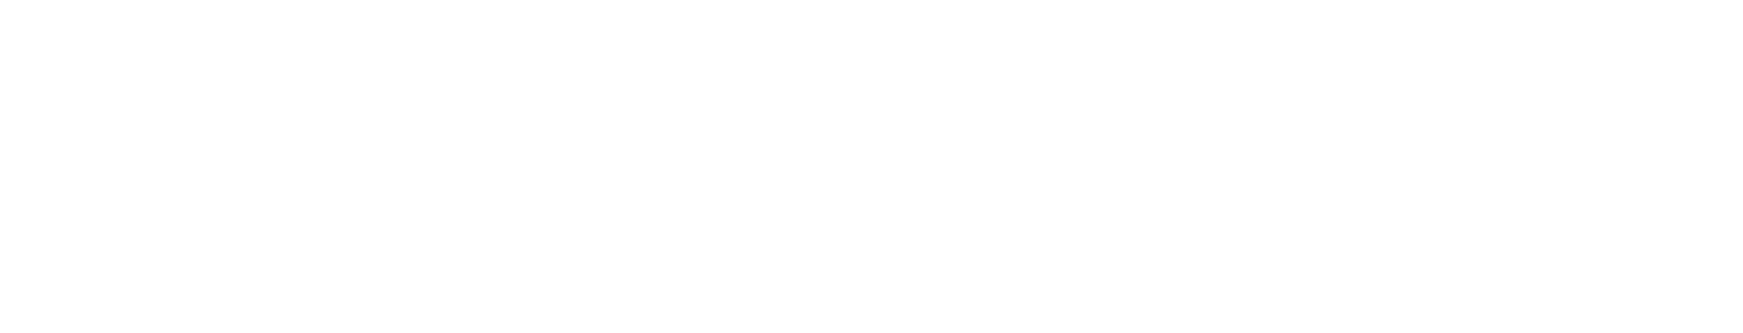 From the depths of darkness, comes the voice of my heart. Get Matsuri started now. We are not alone any more.